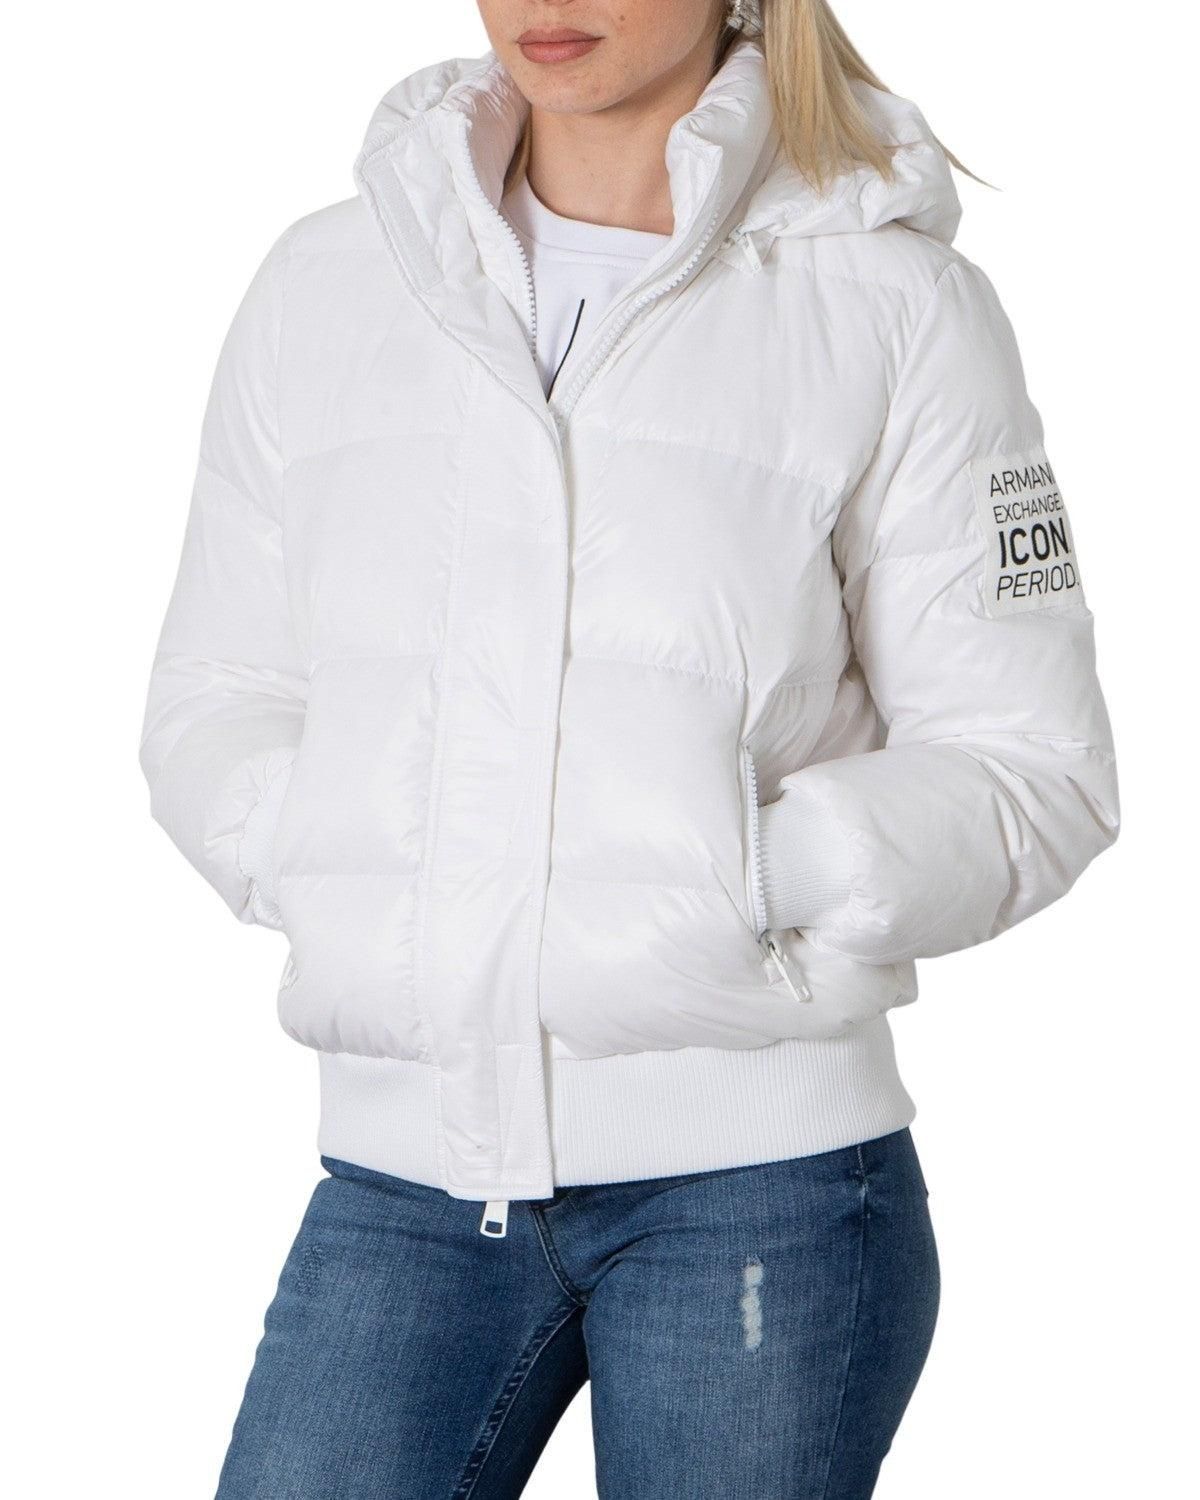 Brand: Armani Exchange   Gender: Women   Type: Jackets   Color: White   Sleeves: Long Sleeve   Collar: Hood   Fastening: Zip and Automatic Buttons   Pockets: Front Pockets   Season: Fall/winter . length:medium. style:zipper. material:nylon. type:bomber. hood:hood